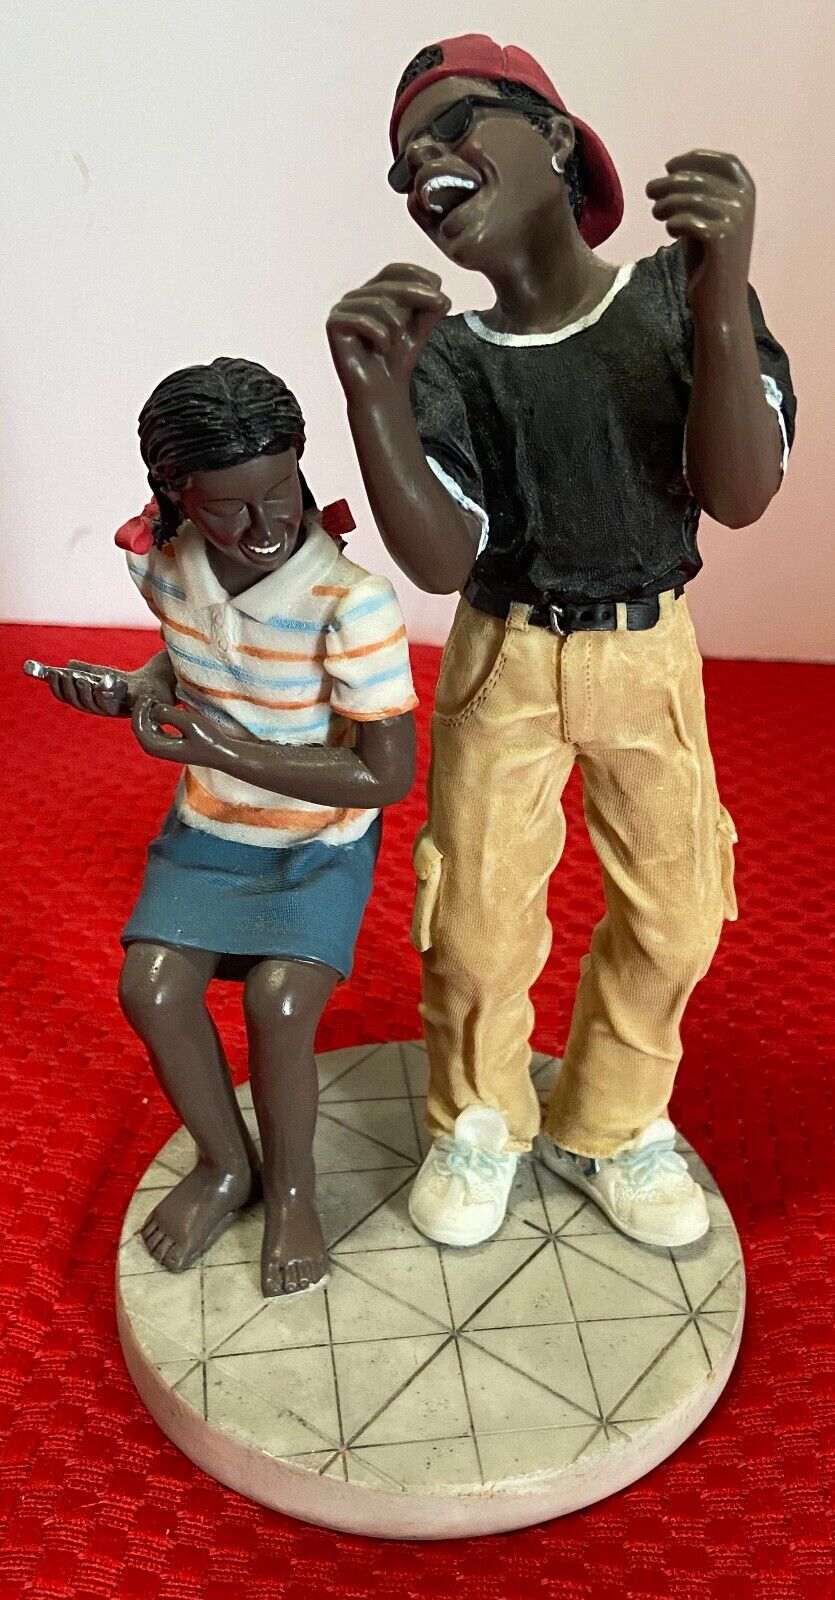 RARE African￼ American Youths - Tom McKinney Figurine “Dancing In The Streets”